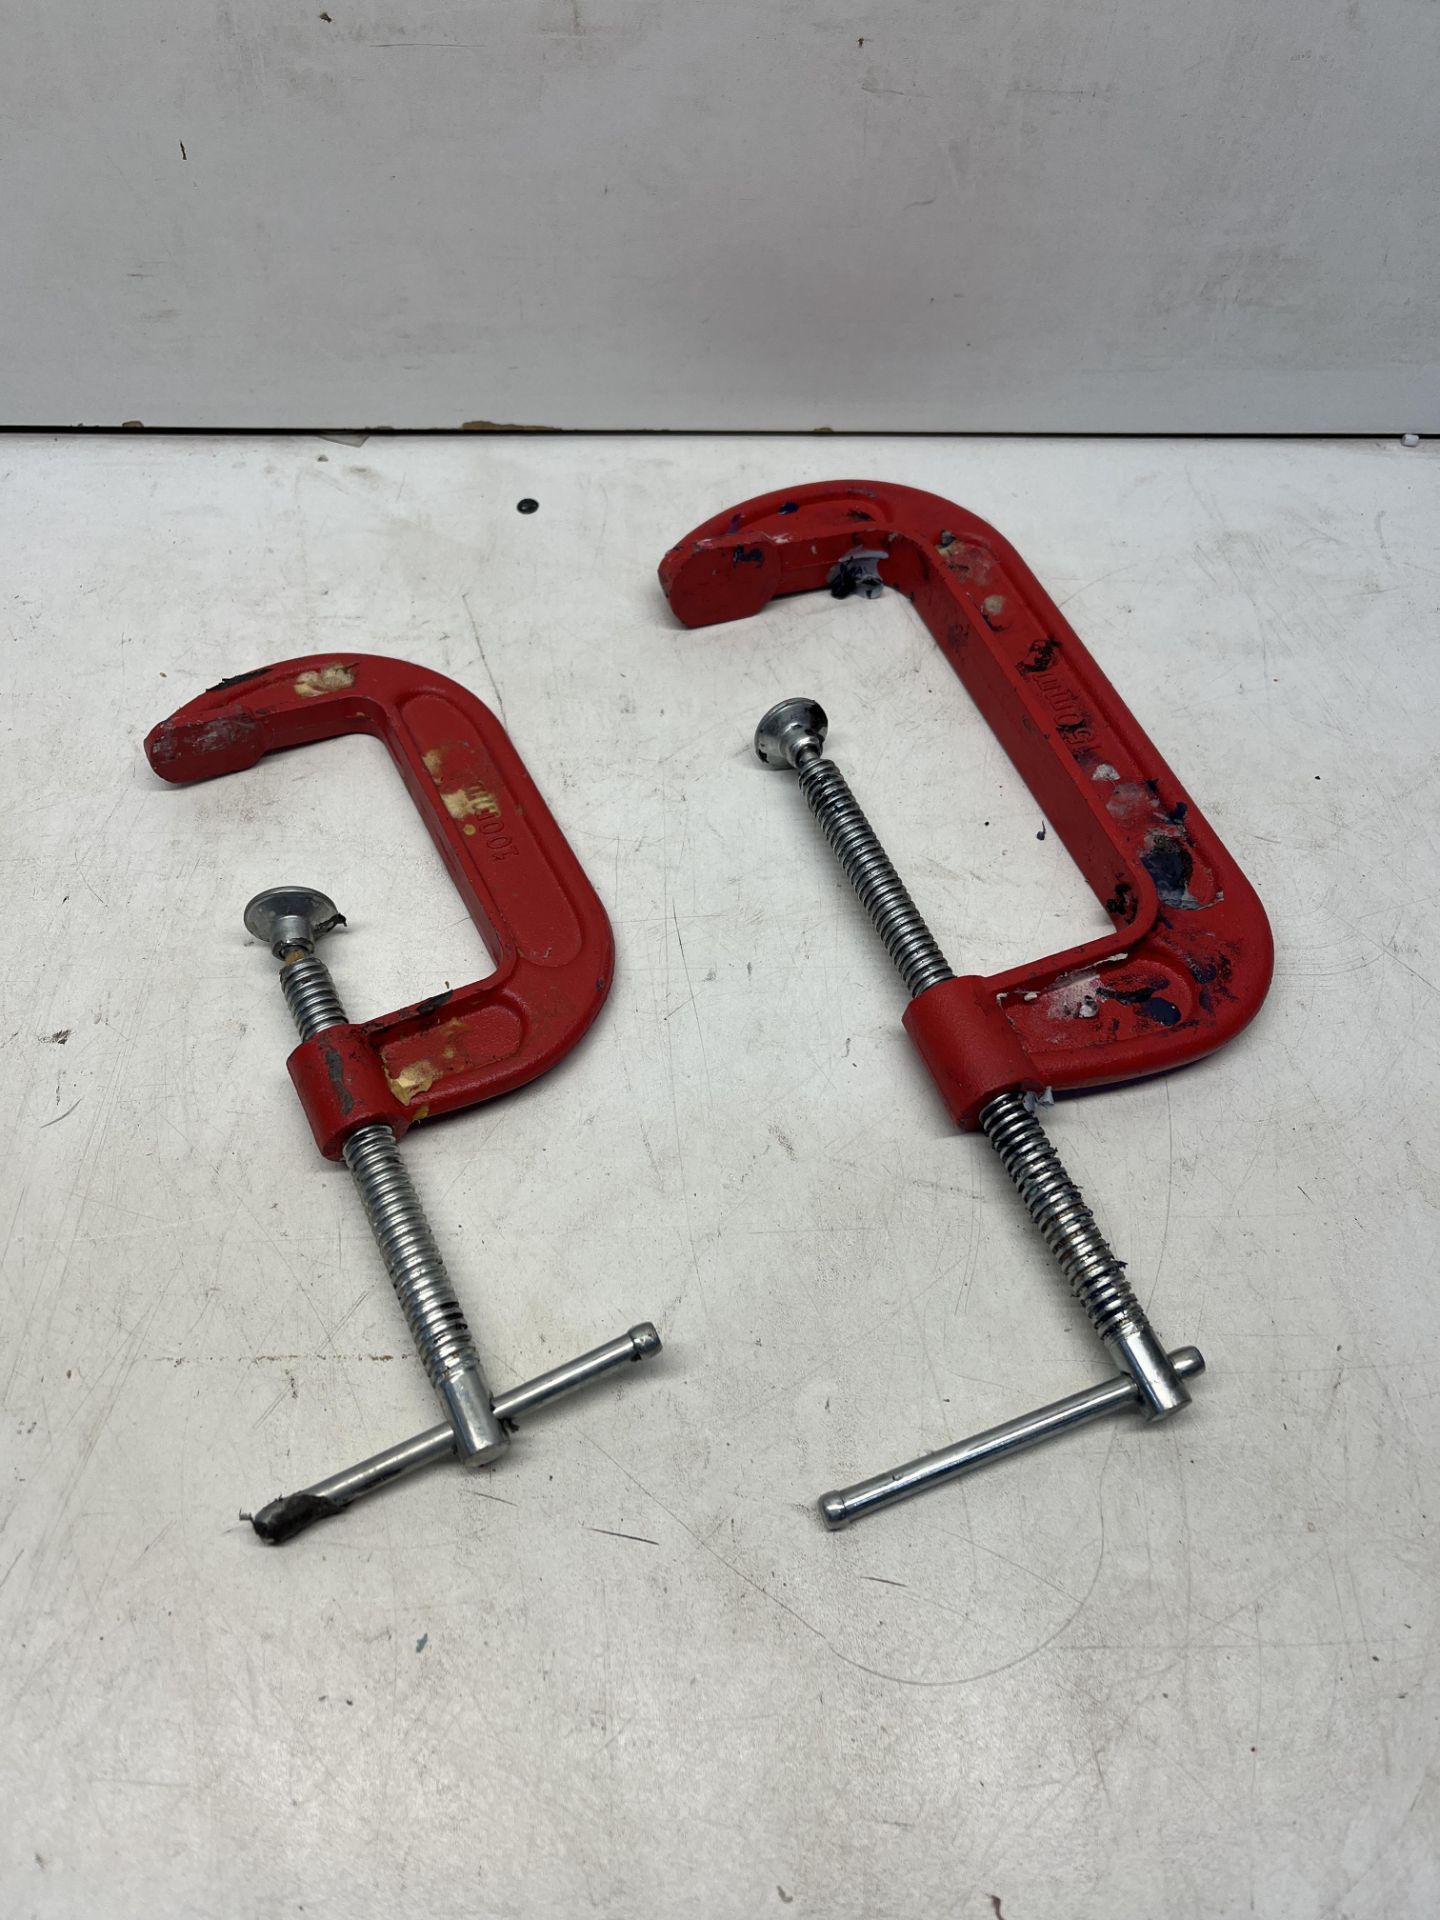 19x Various Sizes G-Clamps - Image 2 of 3